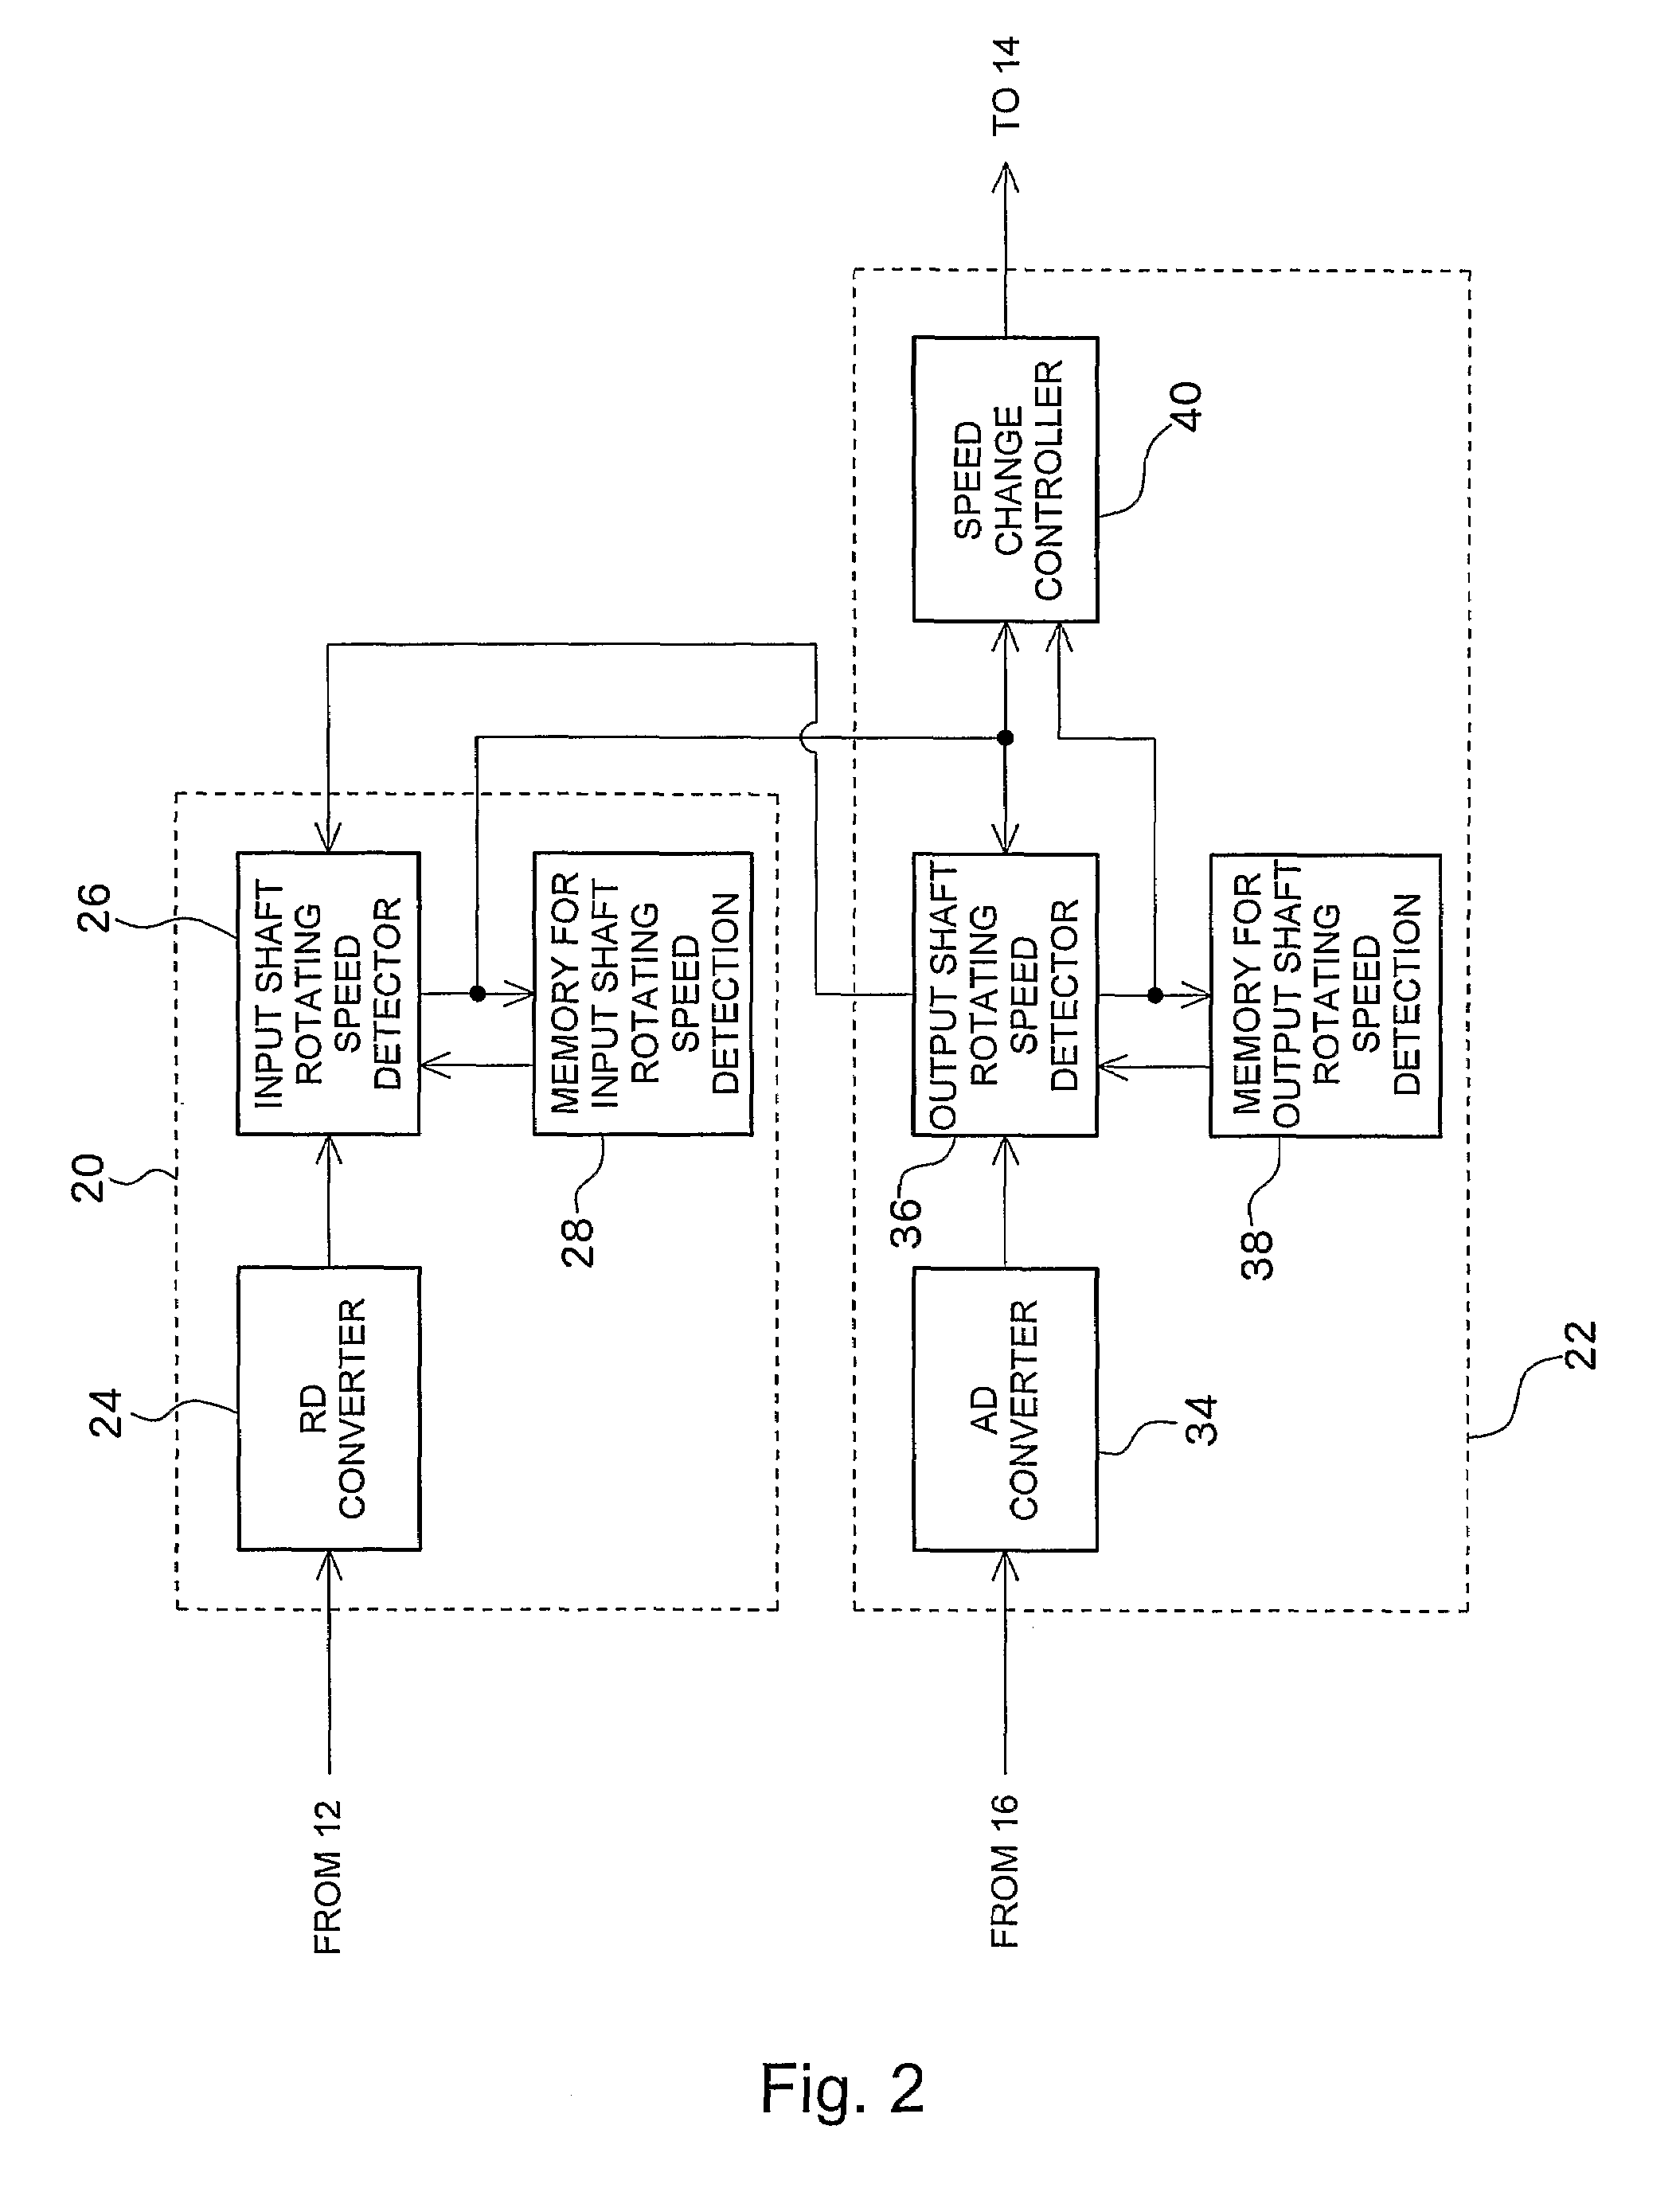 Rotation speed detecting apparatus and automatic transmission controller having the apparatus